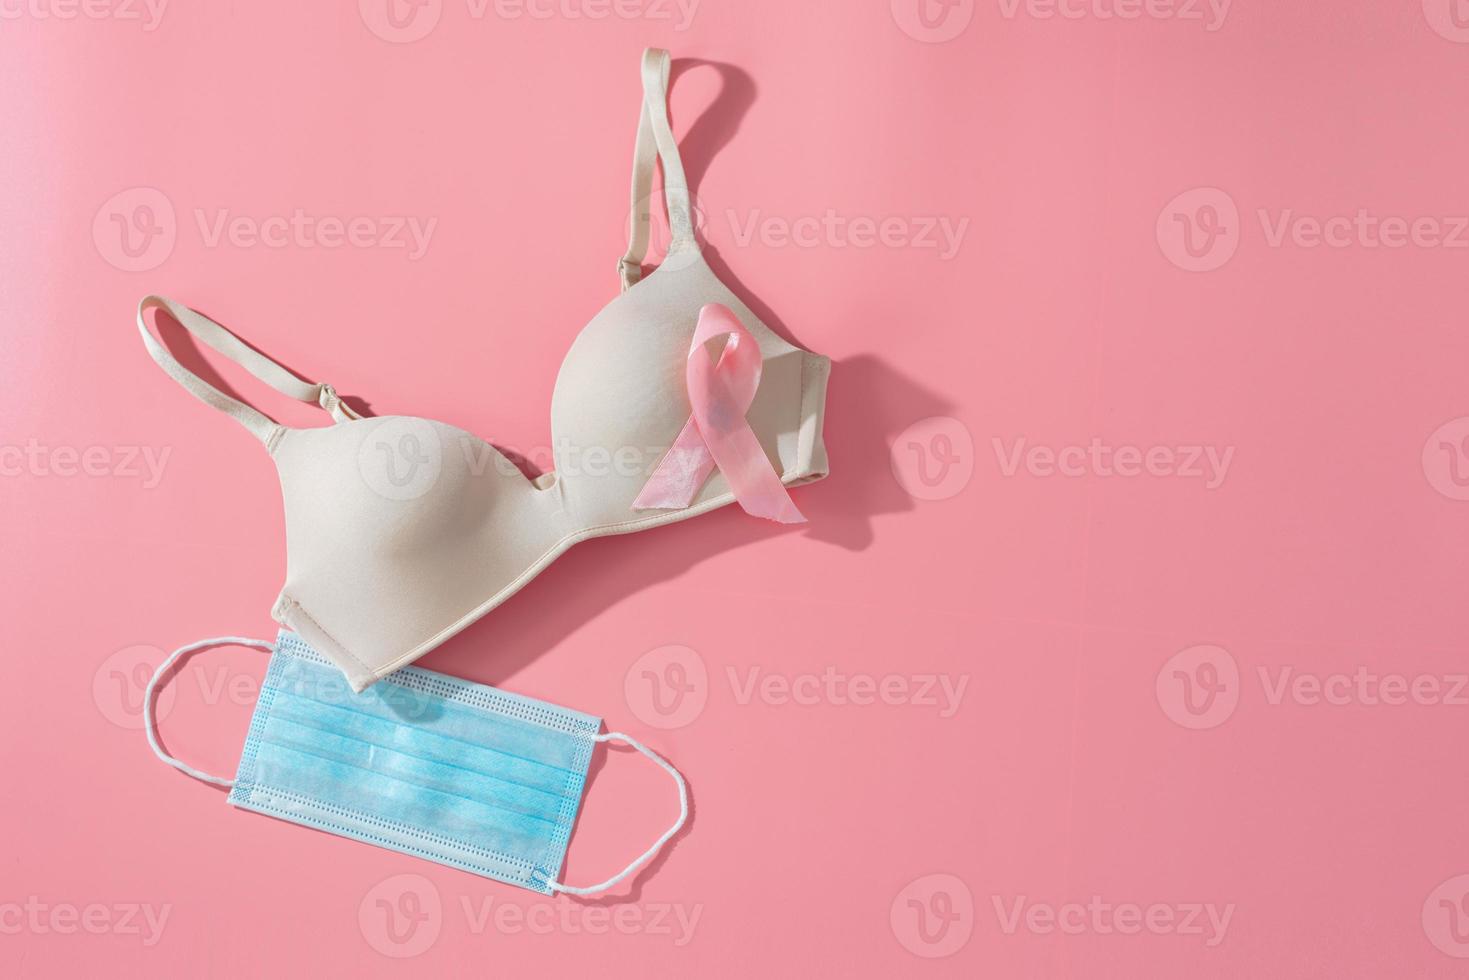 Bra with breast cancer awareness ribbon and hygienic mask. breast cancer coronavirus, Cancer awareness concept photo